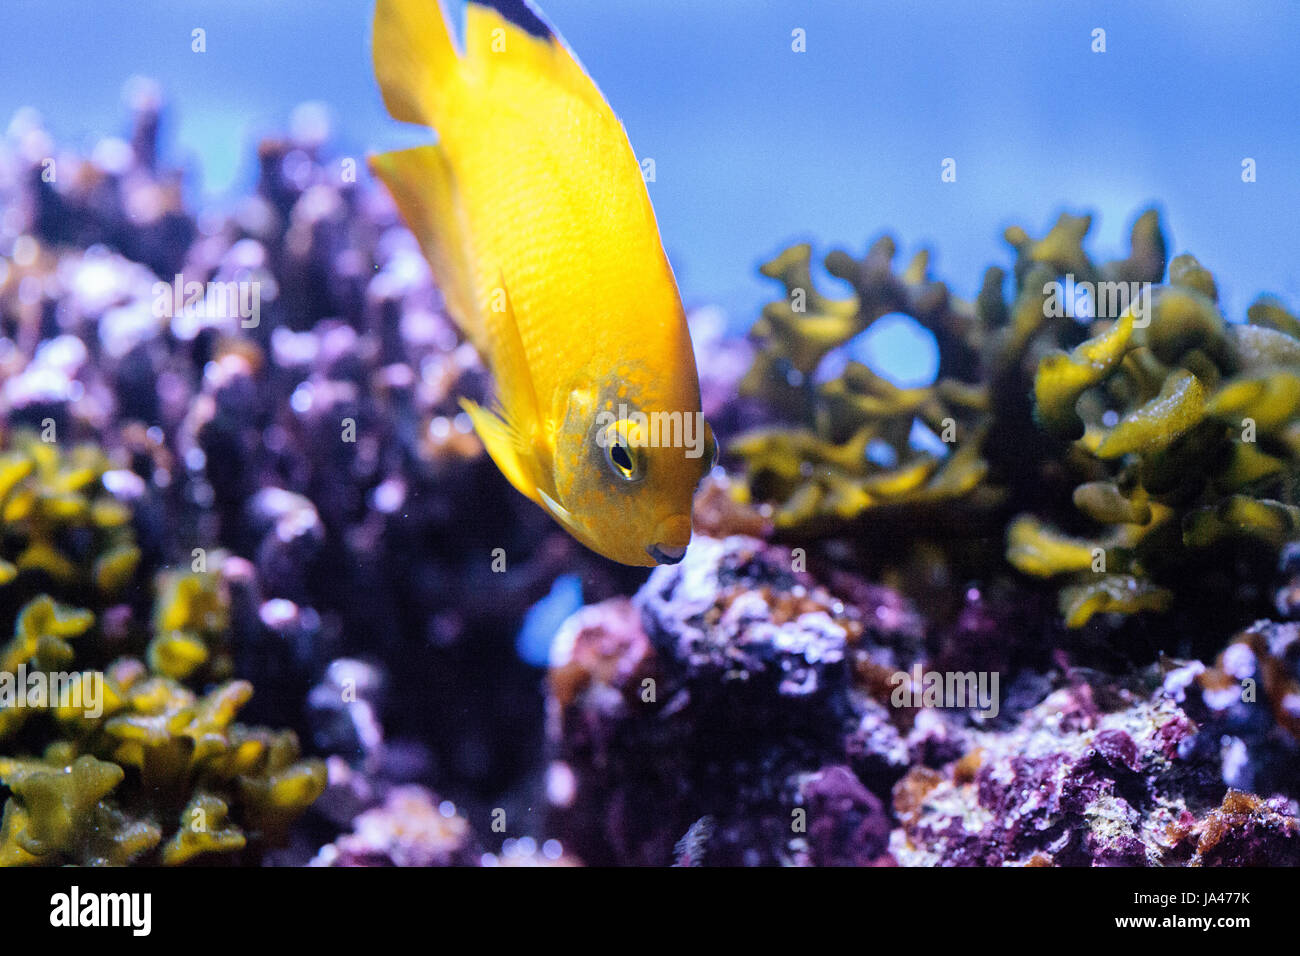 Yellow three spot angelfish Apolemichthys trimaculatus also called flagfin angelfish has a yellow body and purple lips. Stock Photo